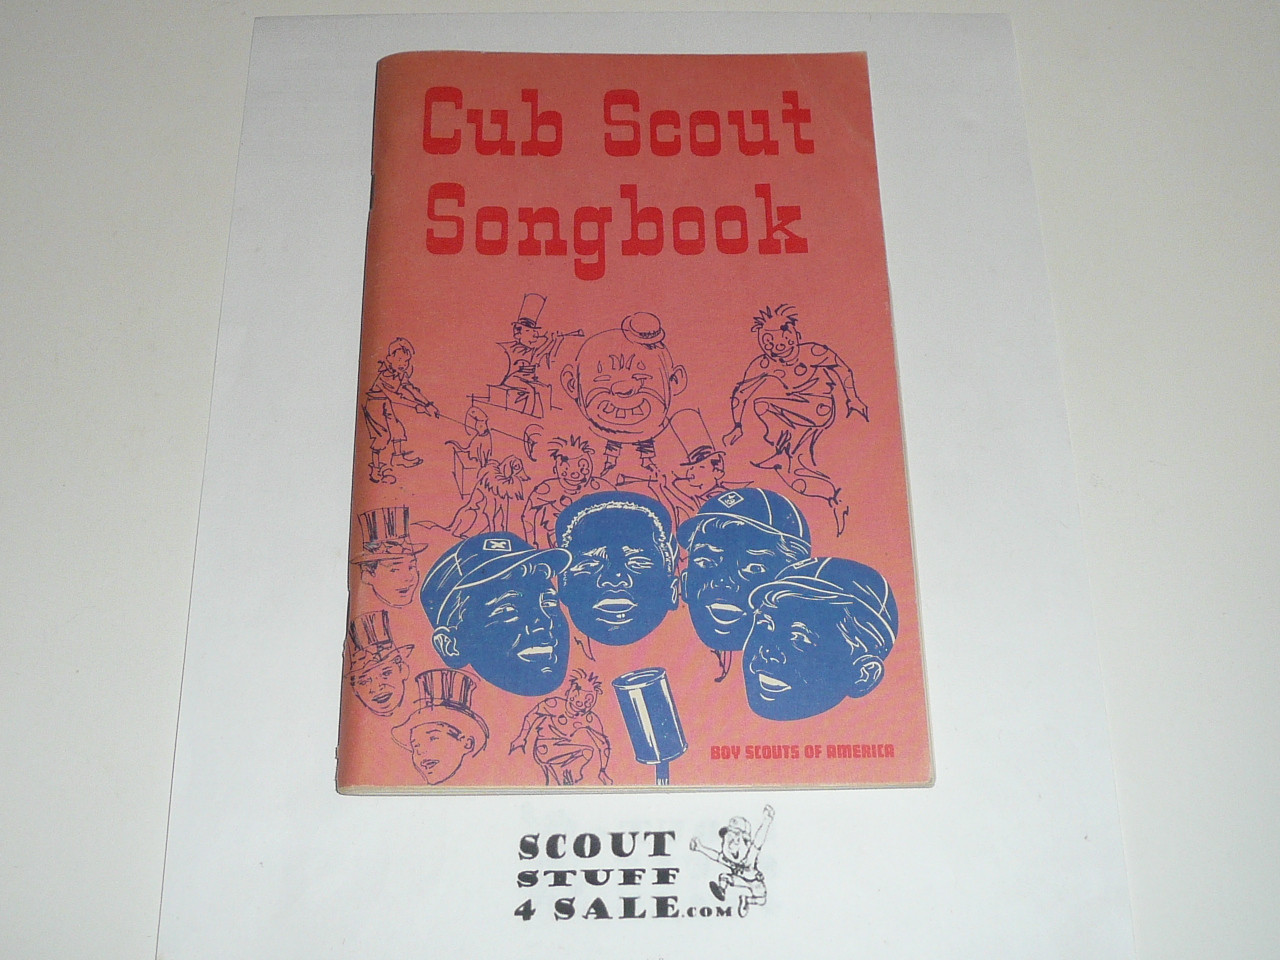 1972 Cub Scout Songbook, 4-72 Printing